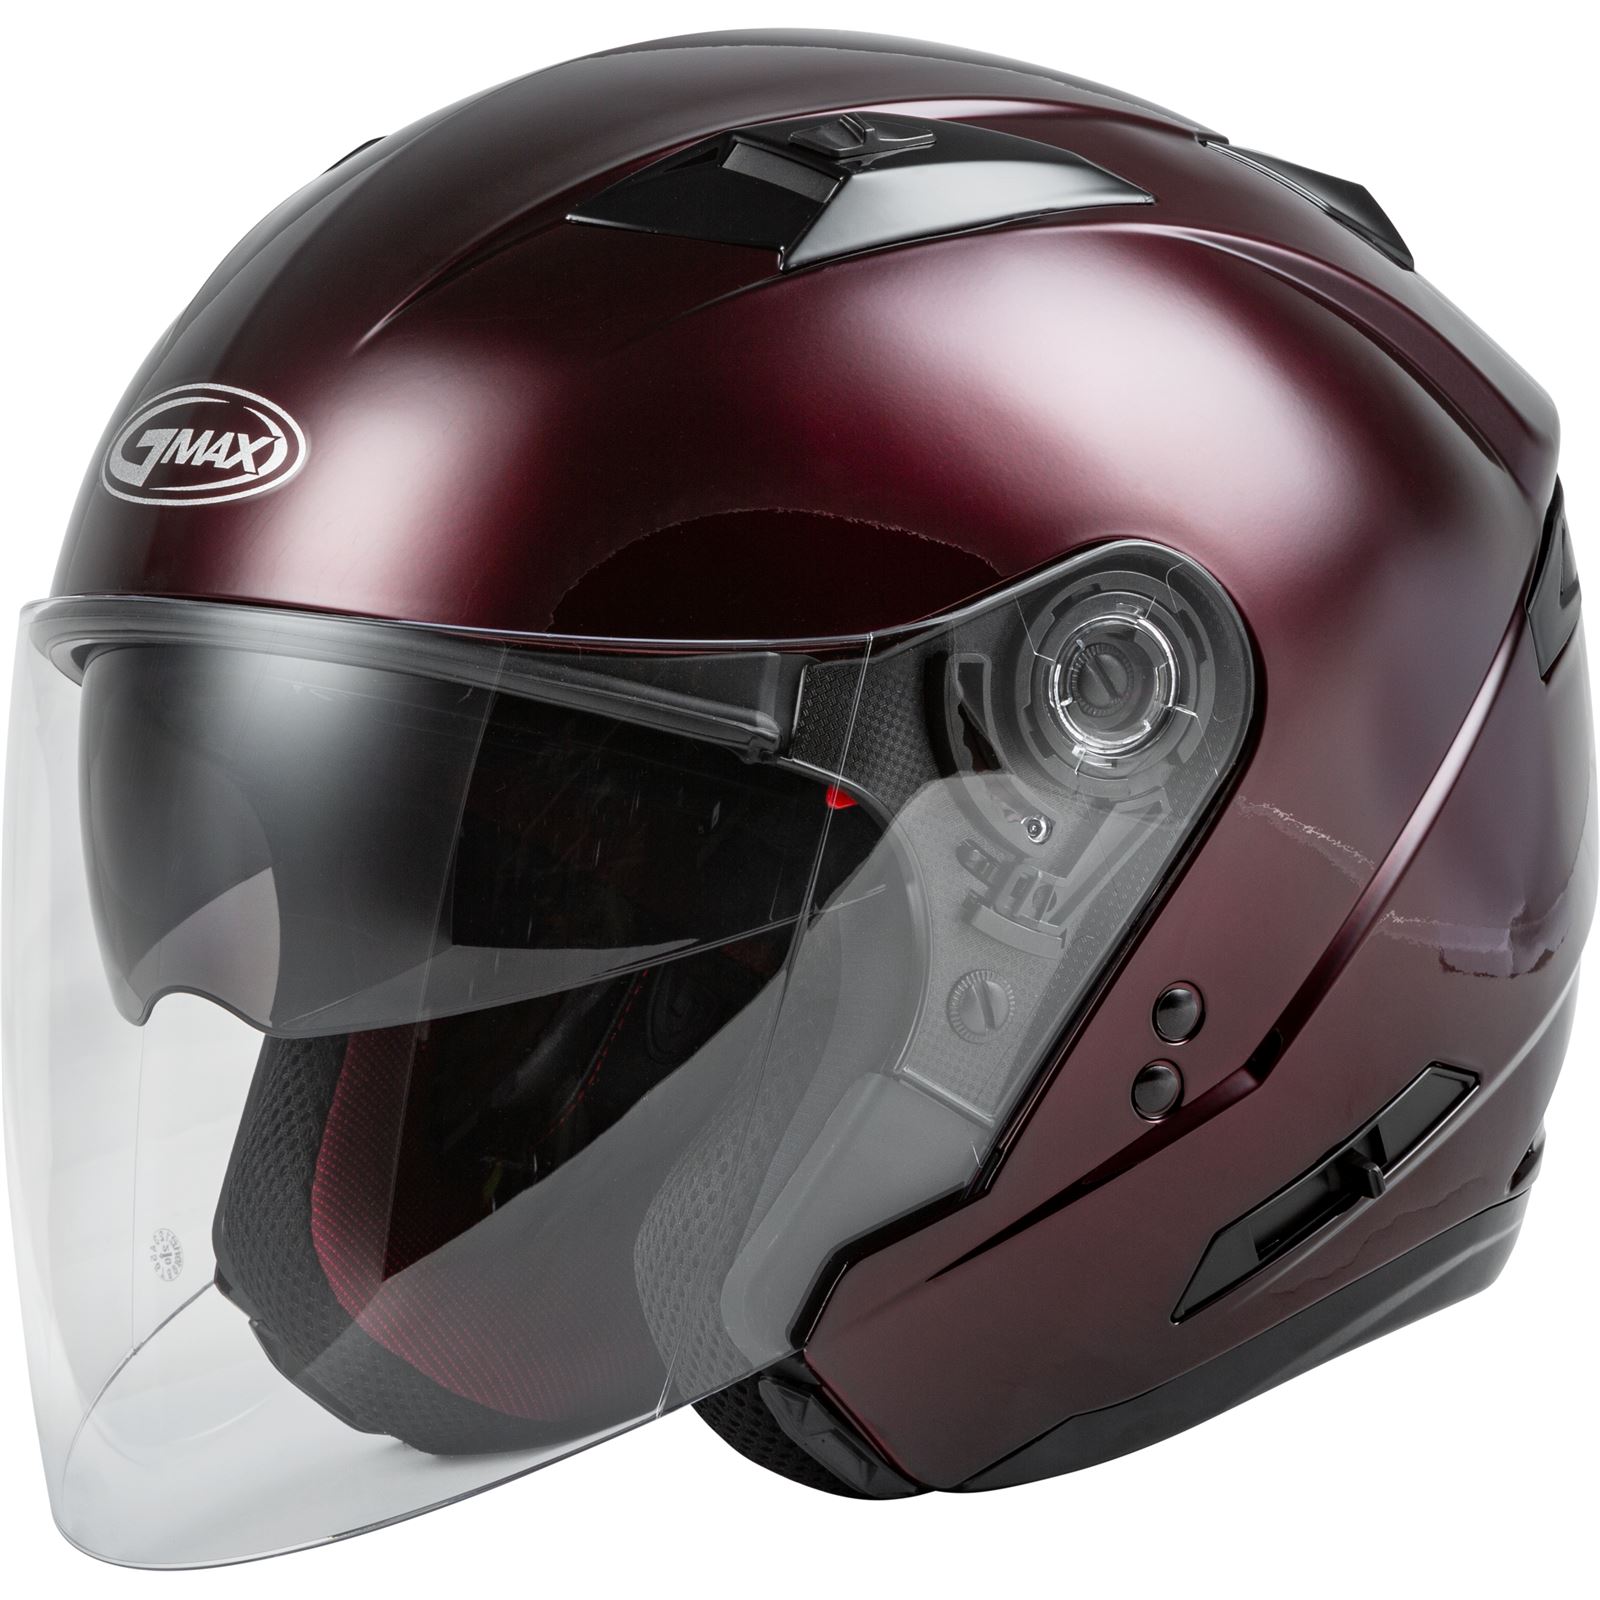 GMax OF-77 Open-Face Helmet - Wine Red - X-Small